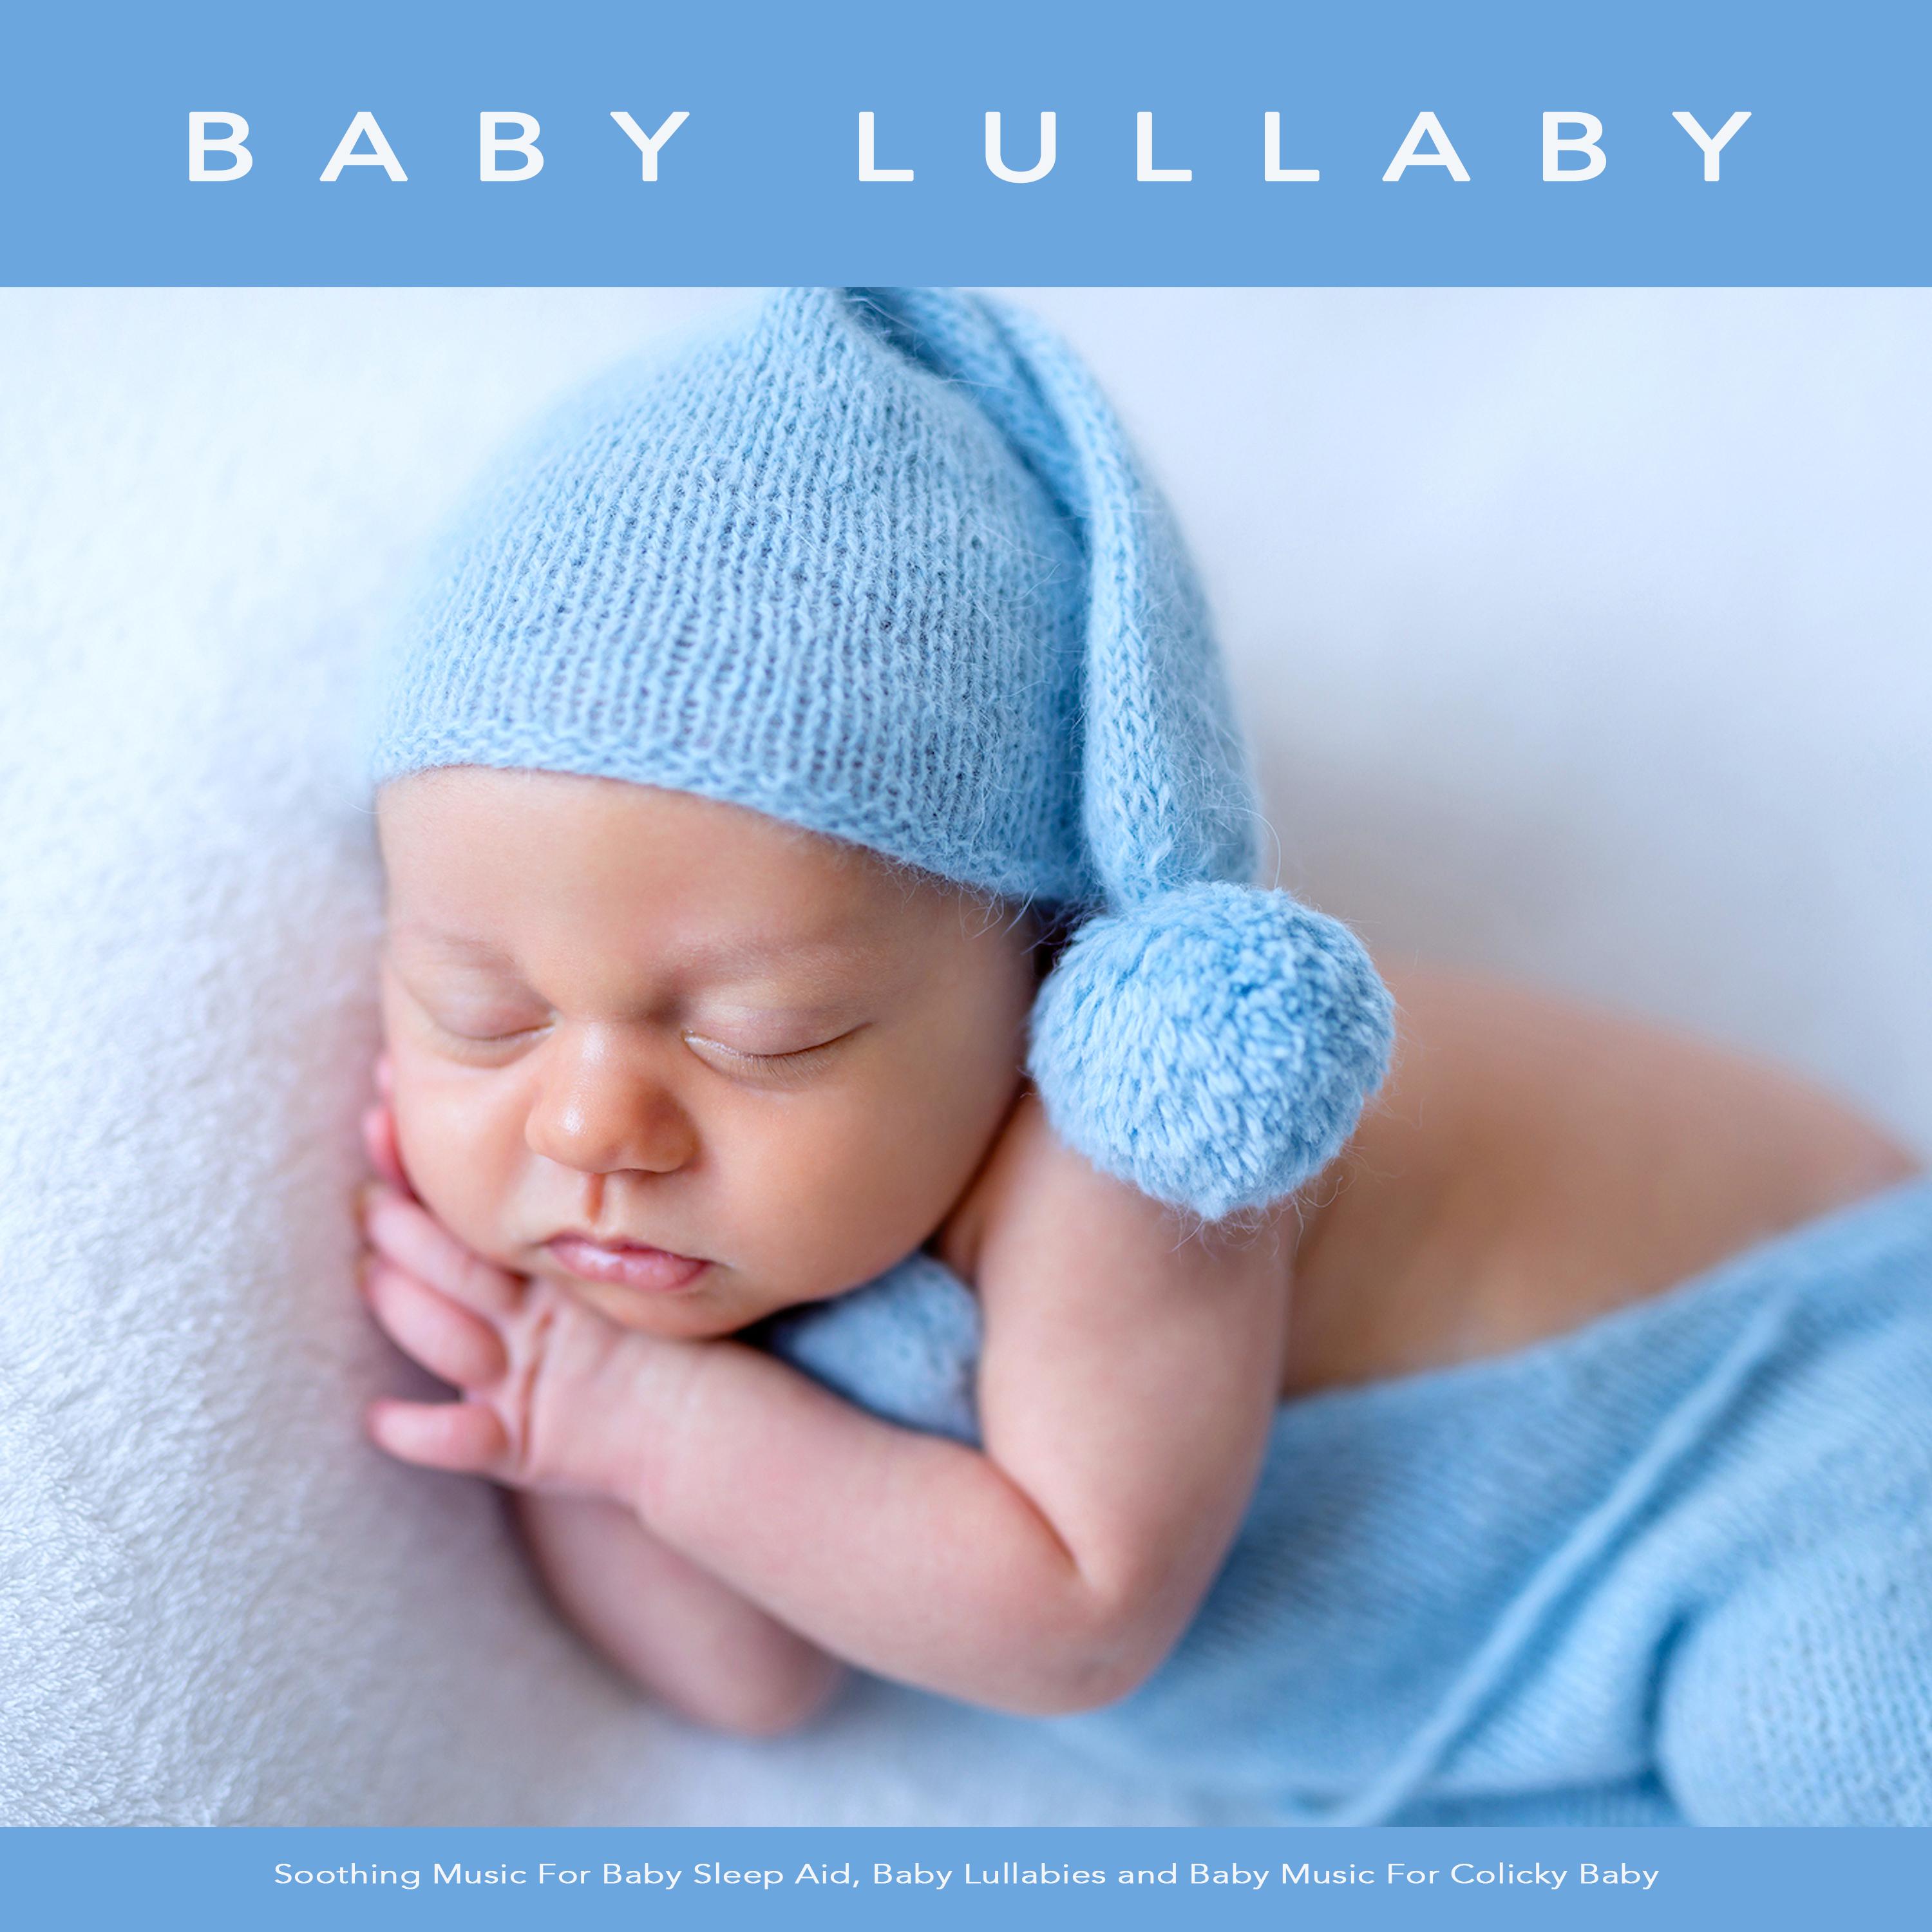 Baby Lullaby and Baby Lullabies